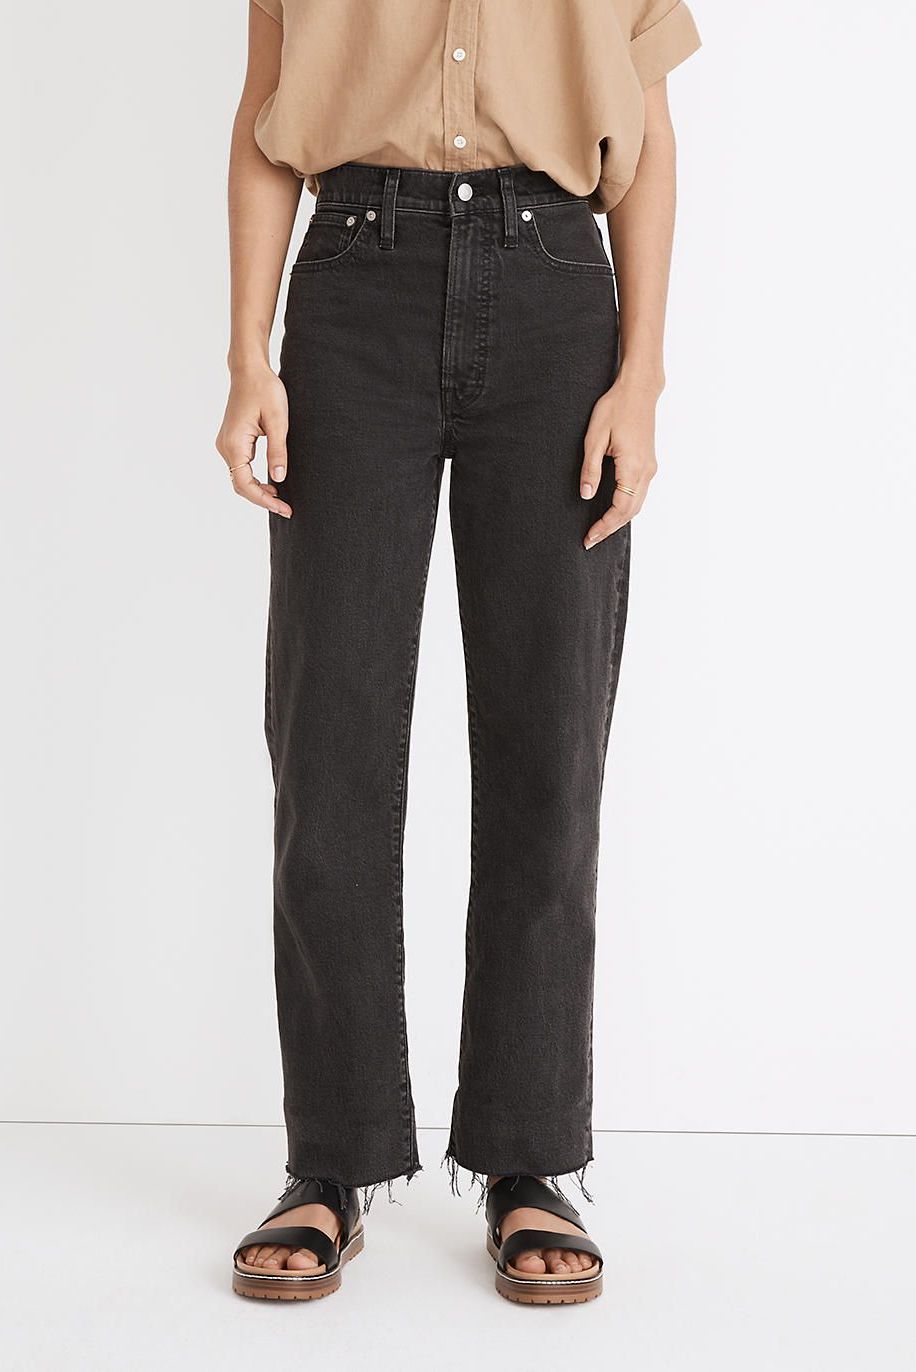 Madewell The Perfect Vintage Straight Jean in Lunar Wash